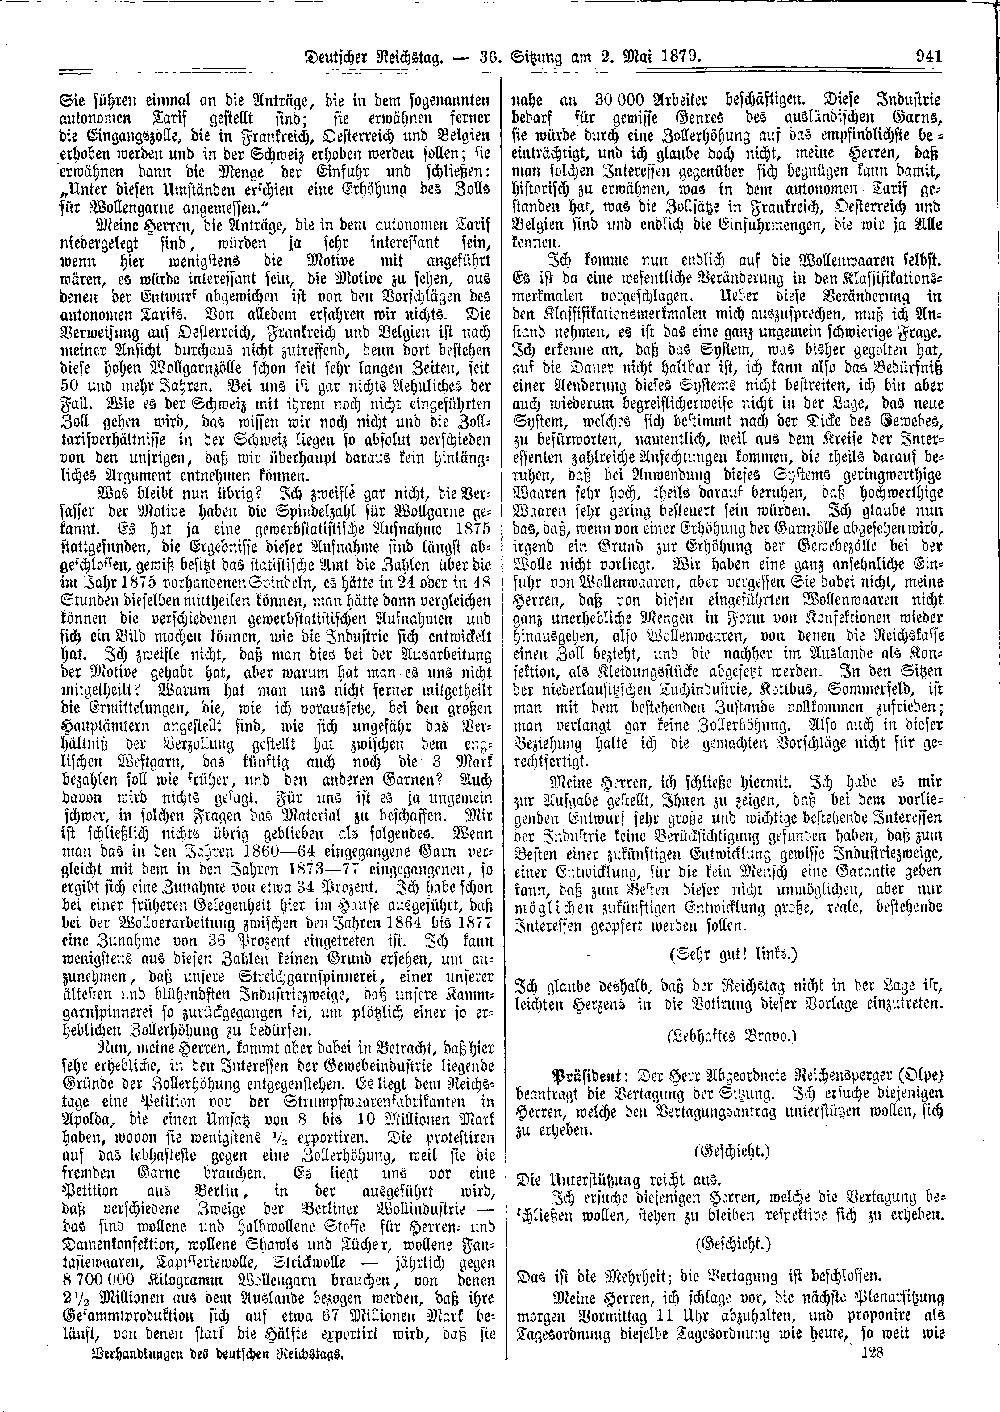 Scan of page 941